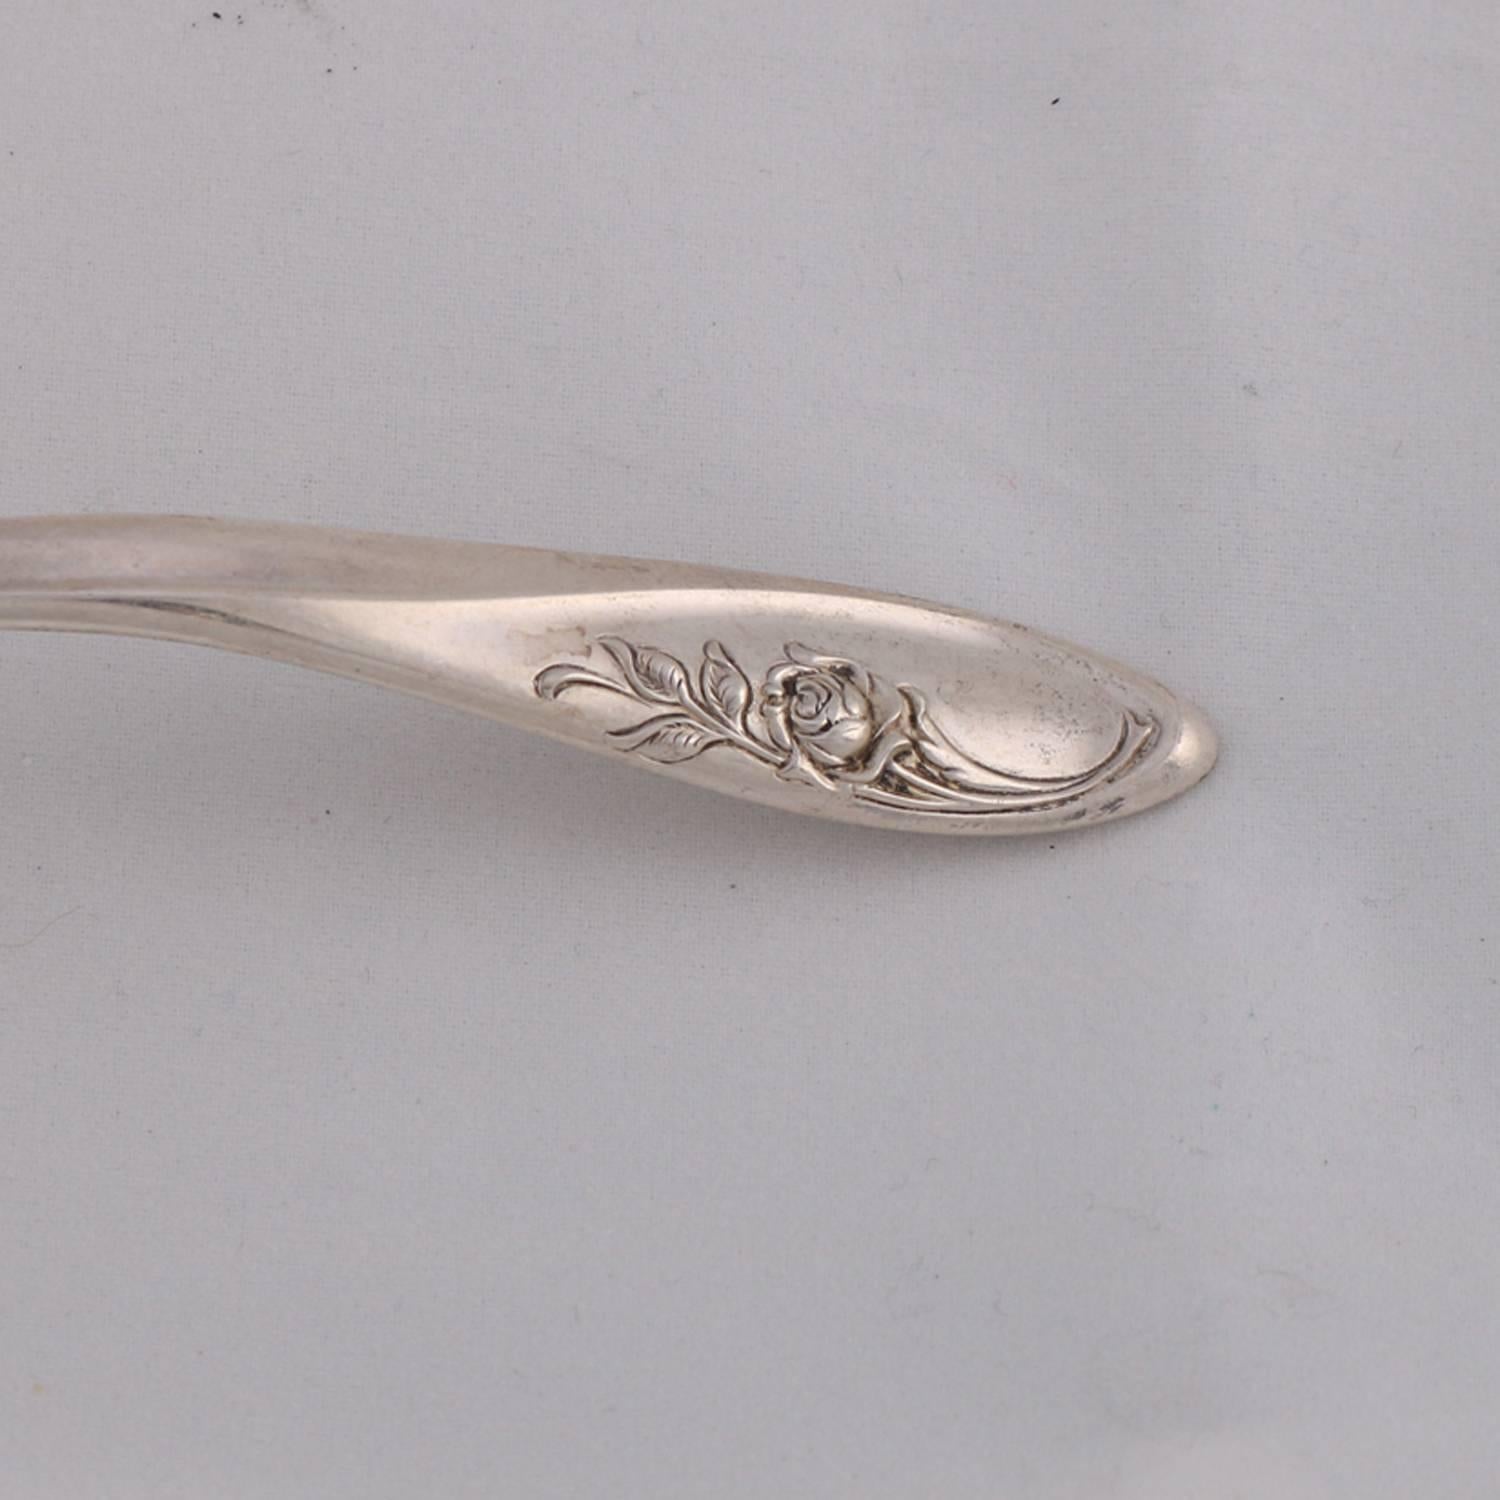 Vintage Sterling Silver Ladle by Towle, 